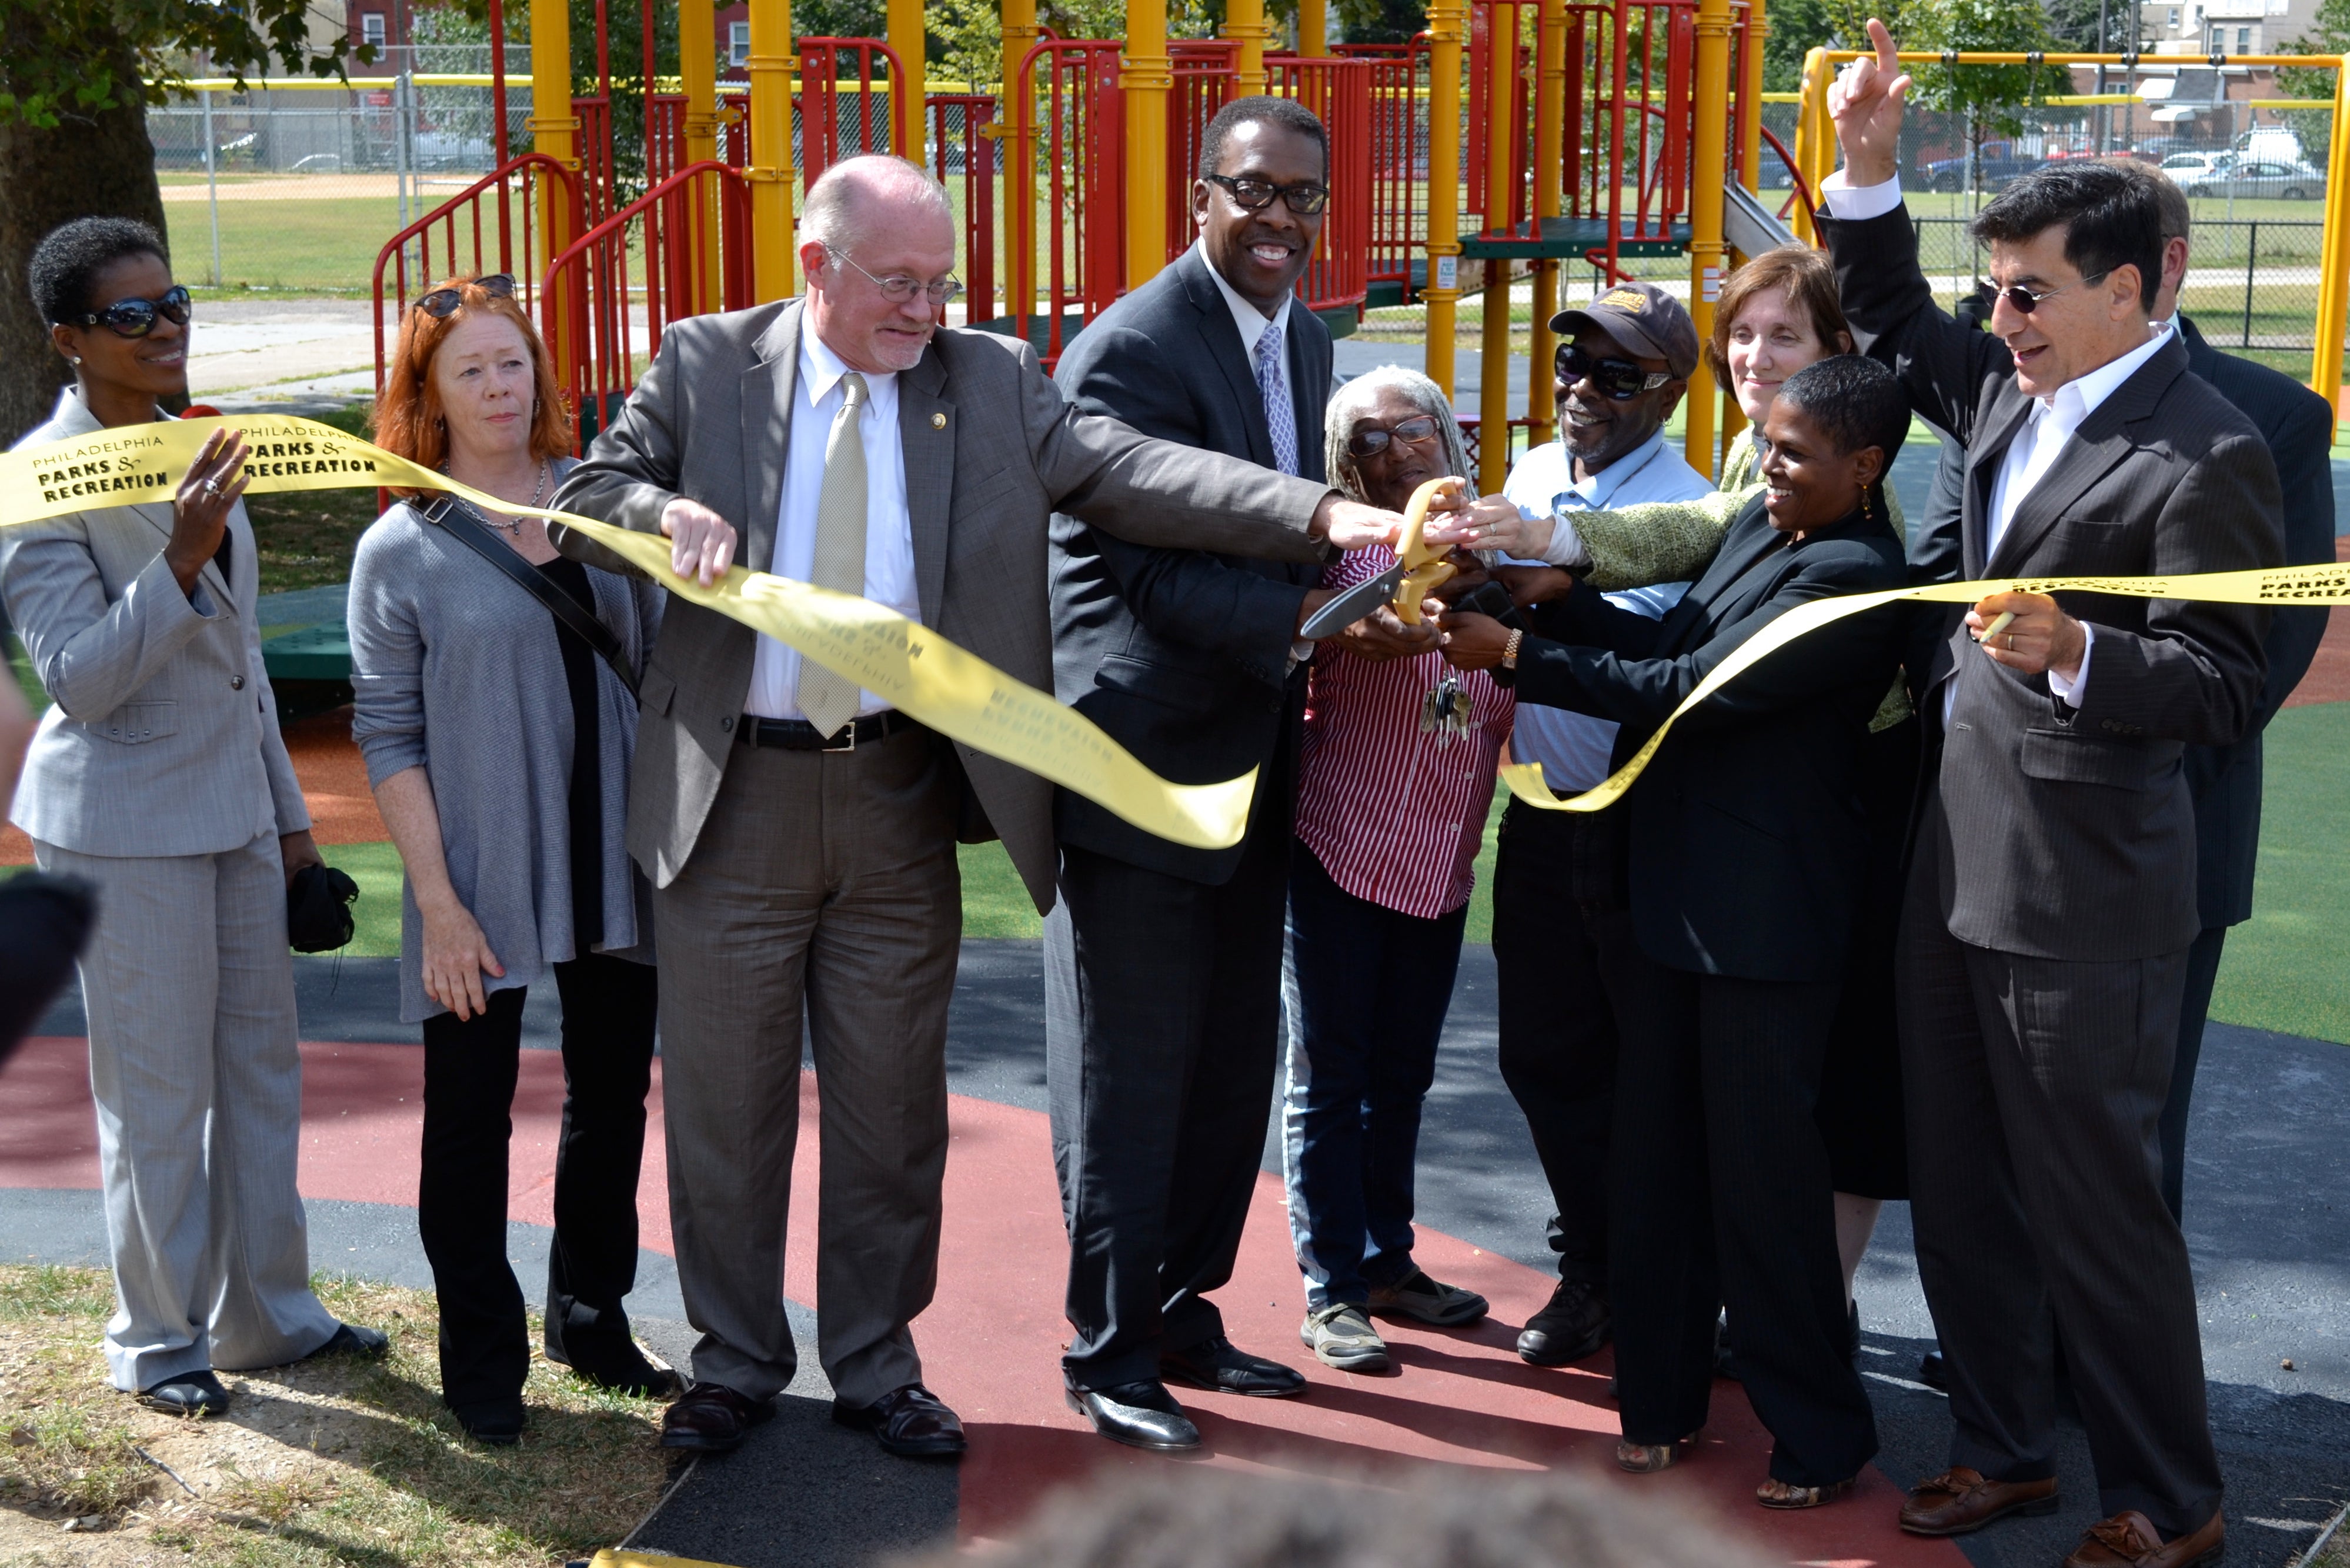 City officials and those involved in the park and community cut the ribbon, officially debuting the project